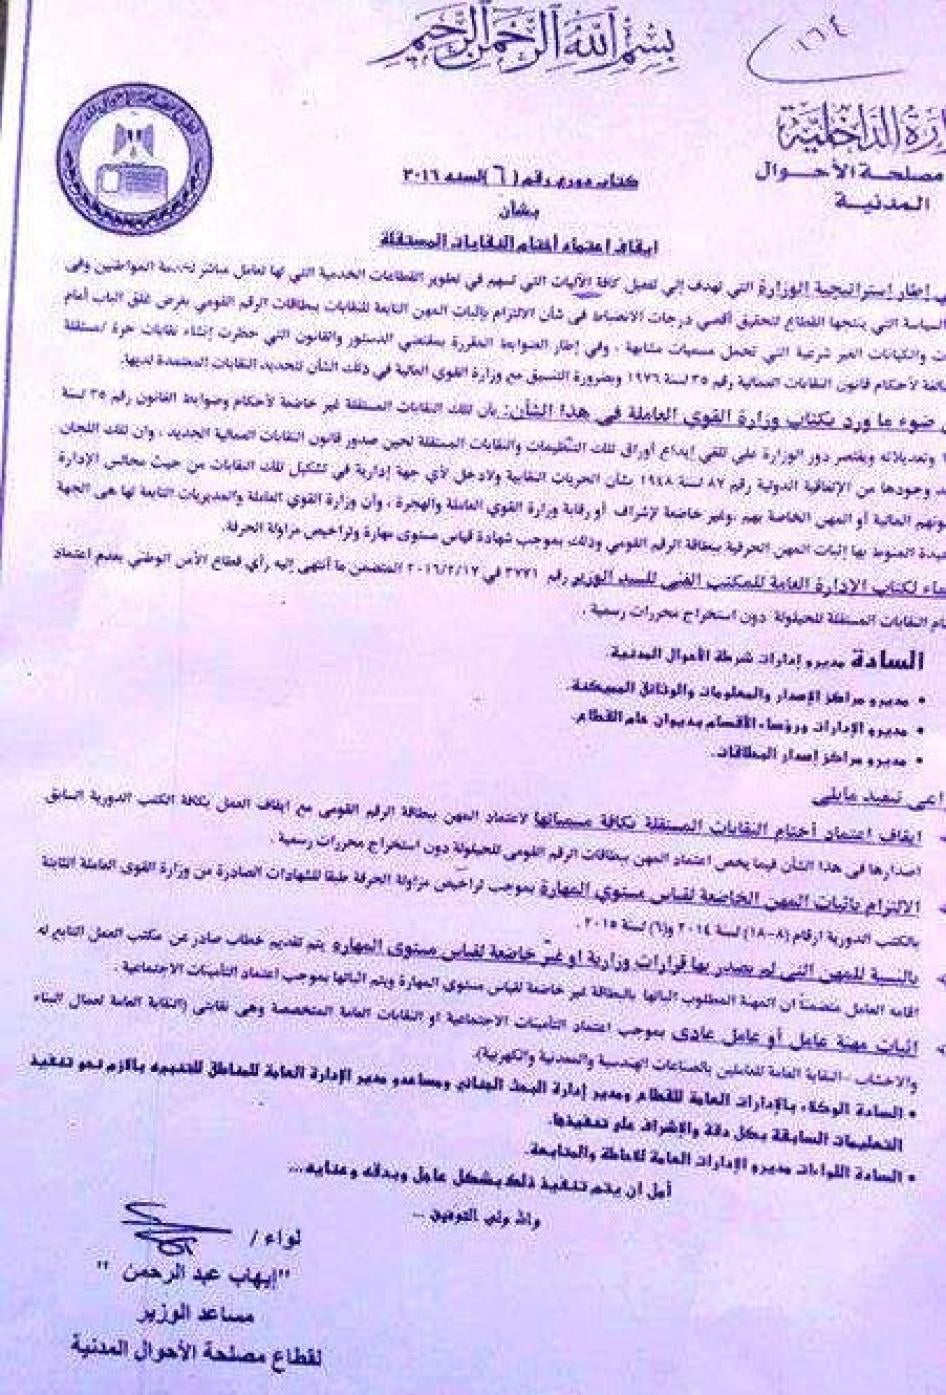 A memo from the Interior Ministry ordering other government bodies to stop accepting documents from independent Unions